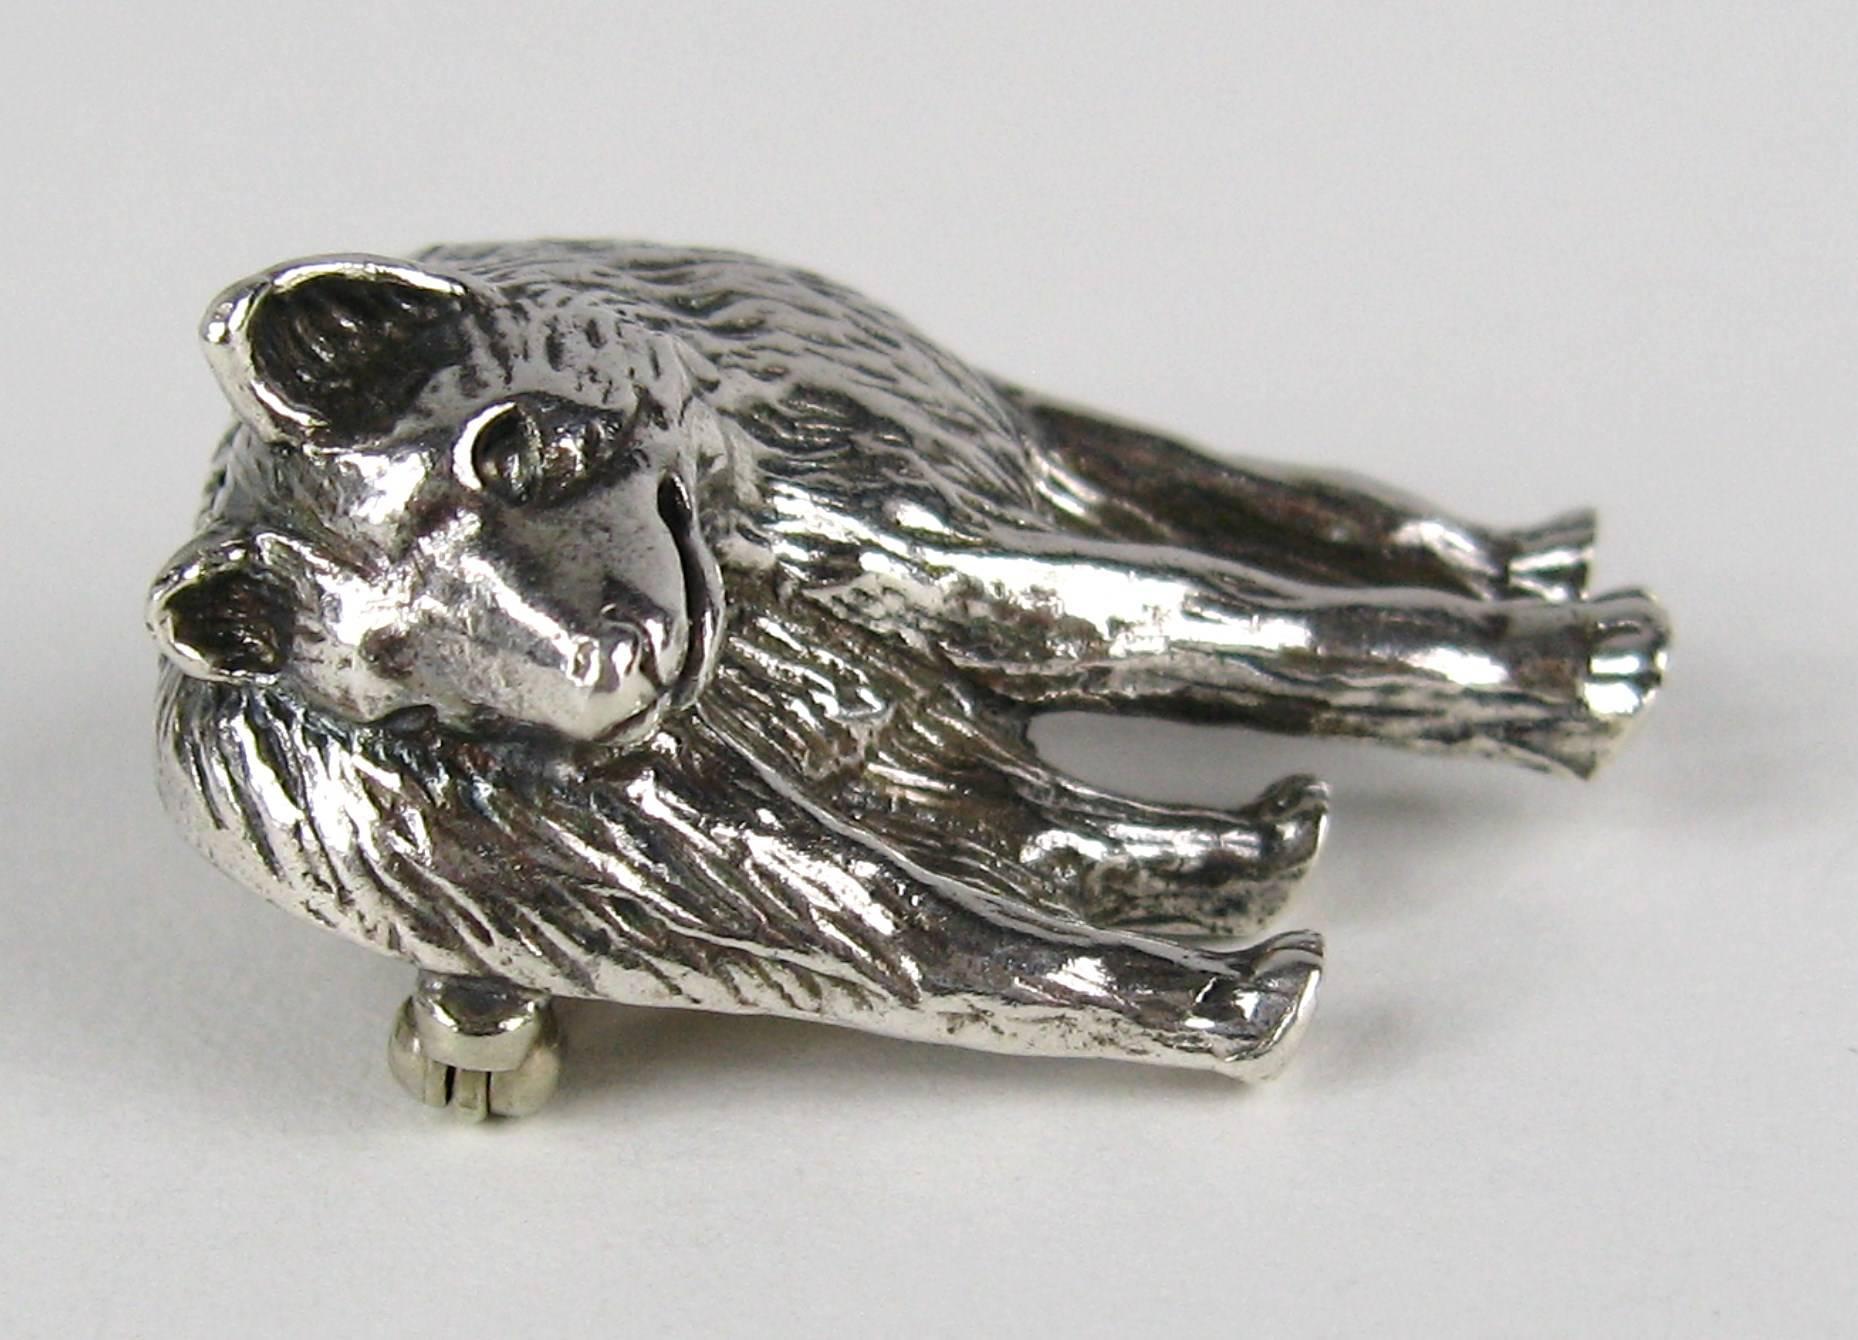 The work of New Mexico silversmith Carol Felley rarely comes along and when it does, it's a thrill because her designs are so amazing. This sterling silver Wolf brooch is stunning. 3-D Figurative Wolf staring down it's prey. Matching bracelet